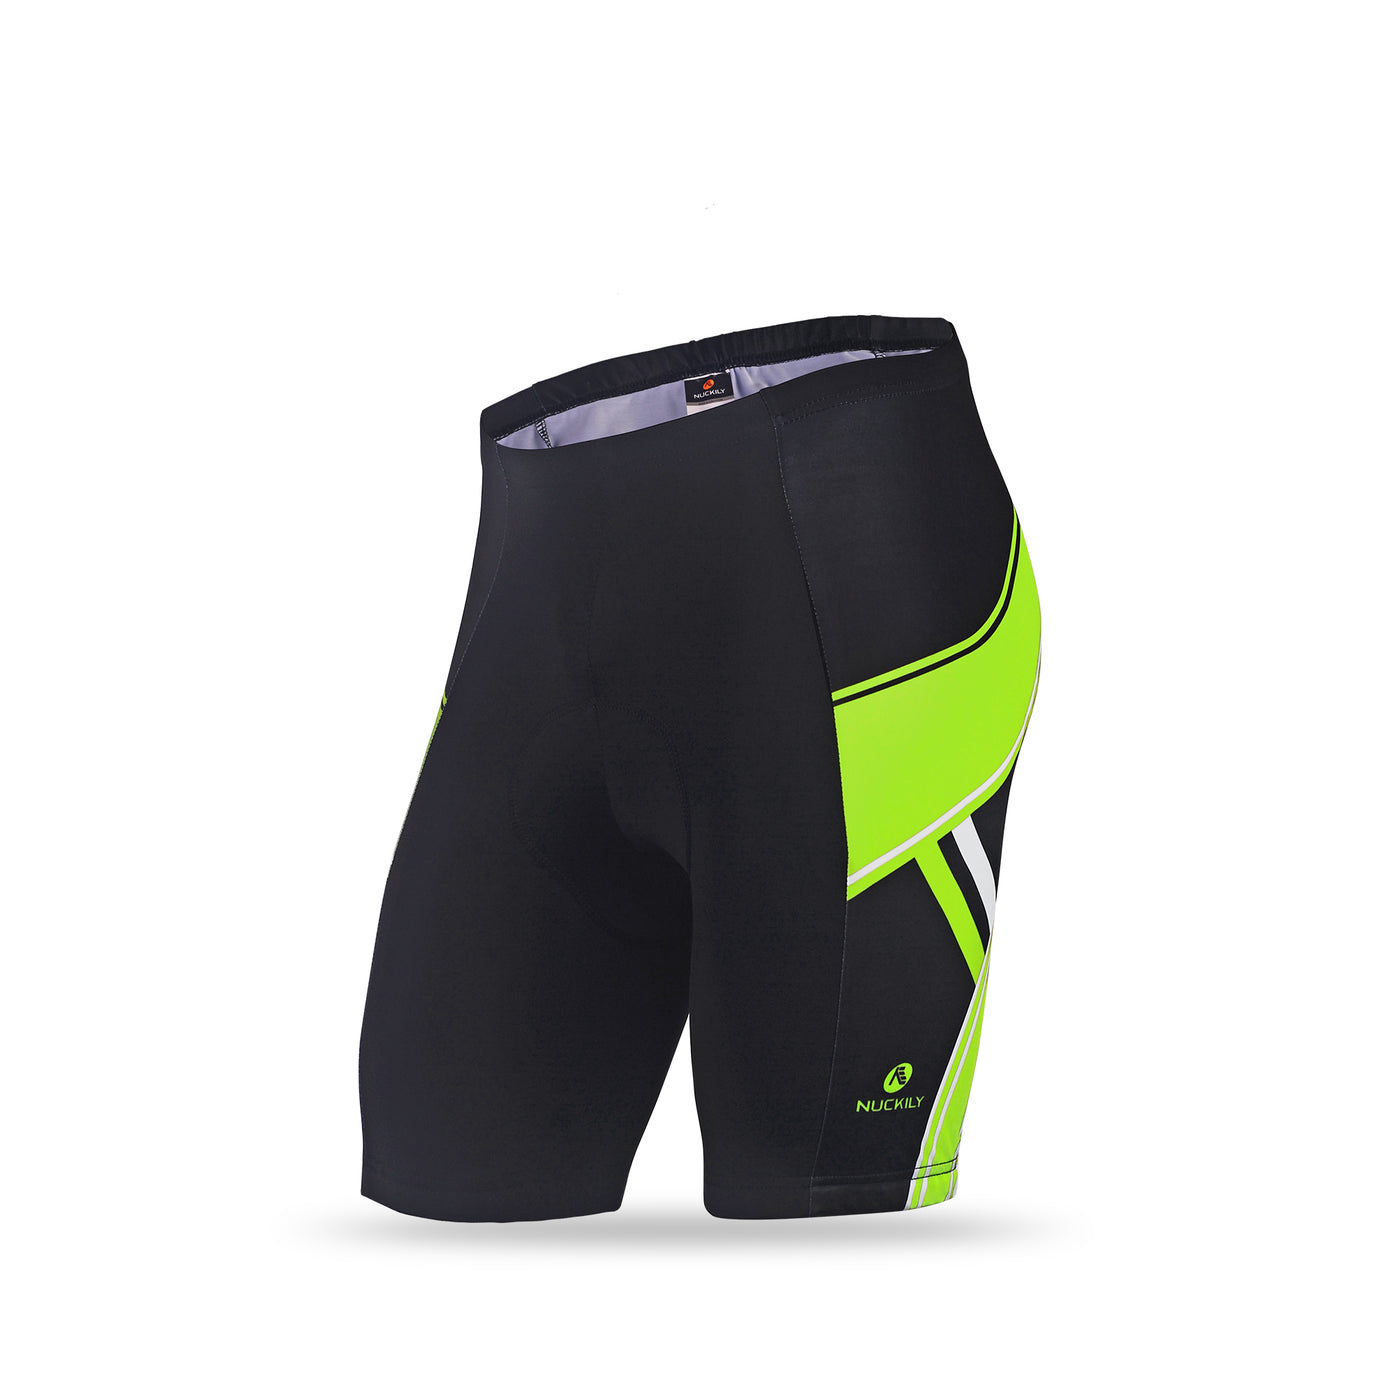 Zakpro Cycling Shorts - Extreme (with Gel pad )